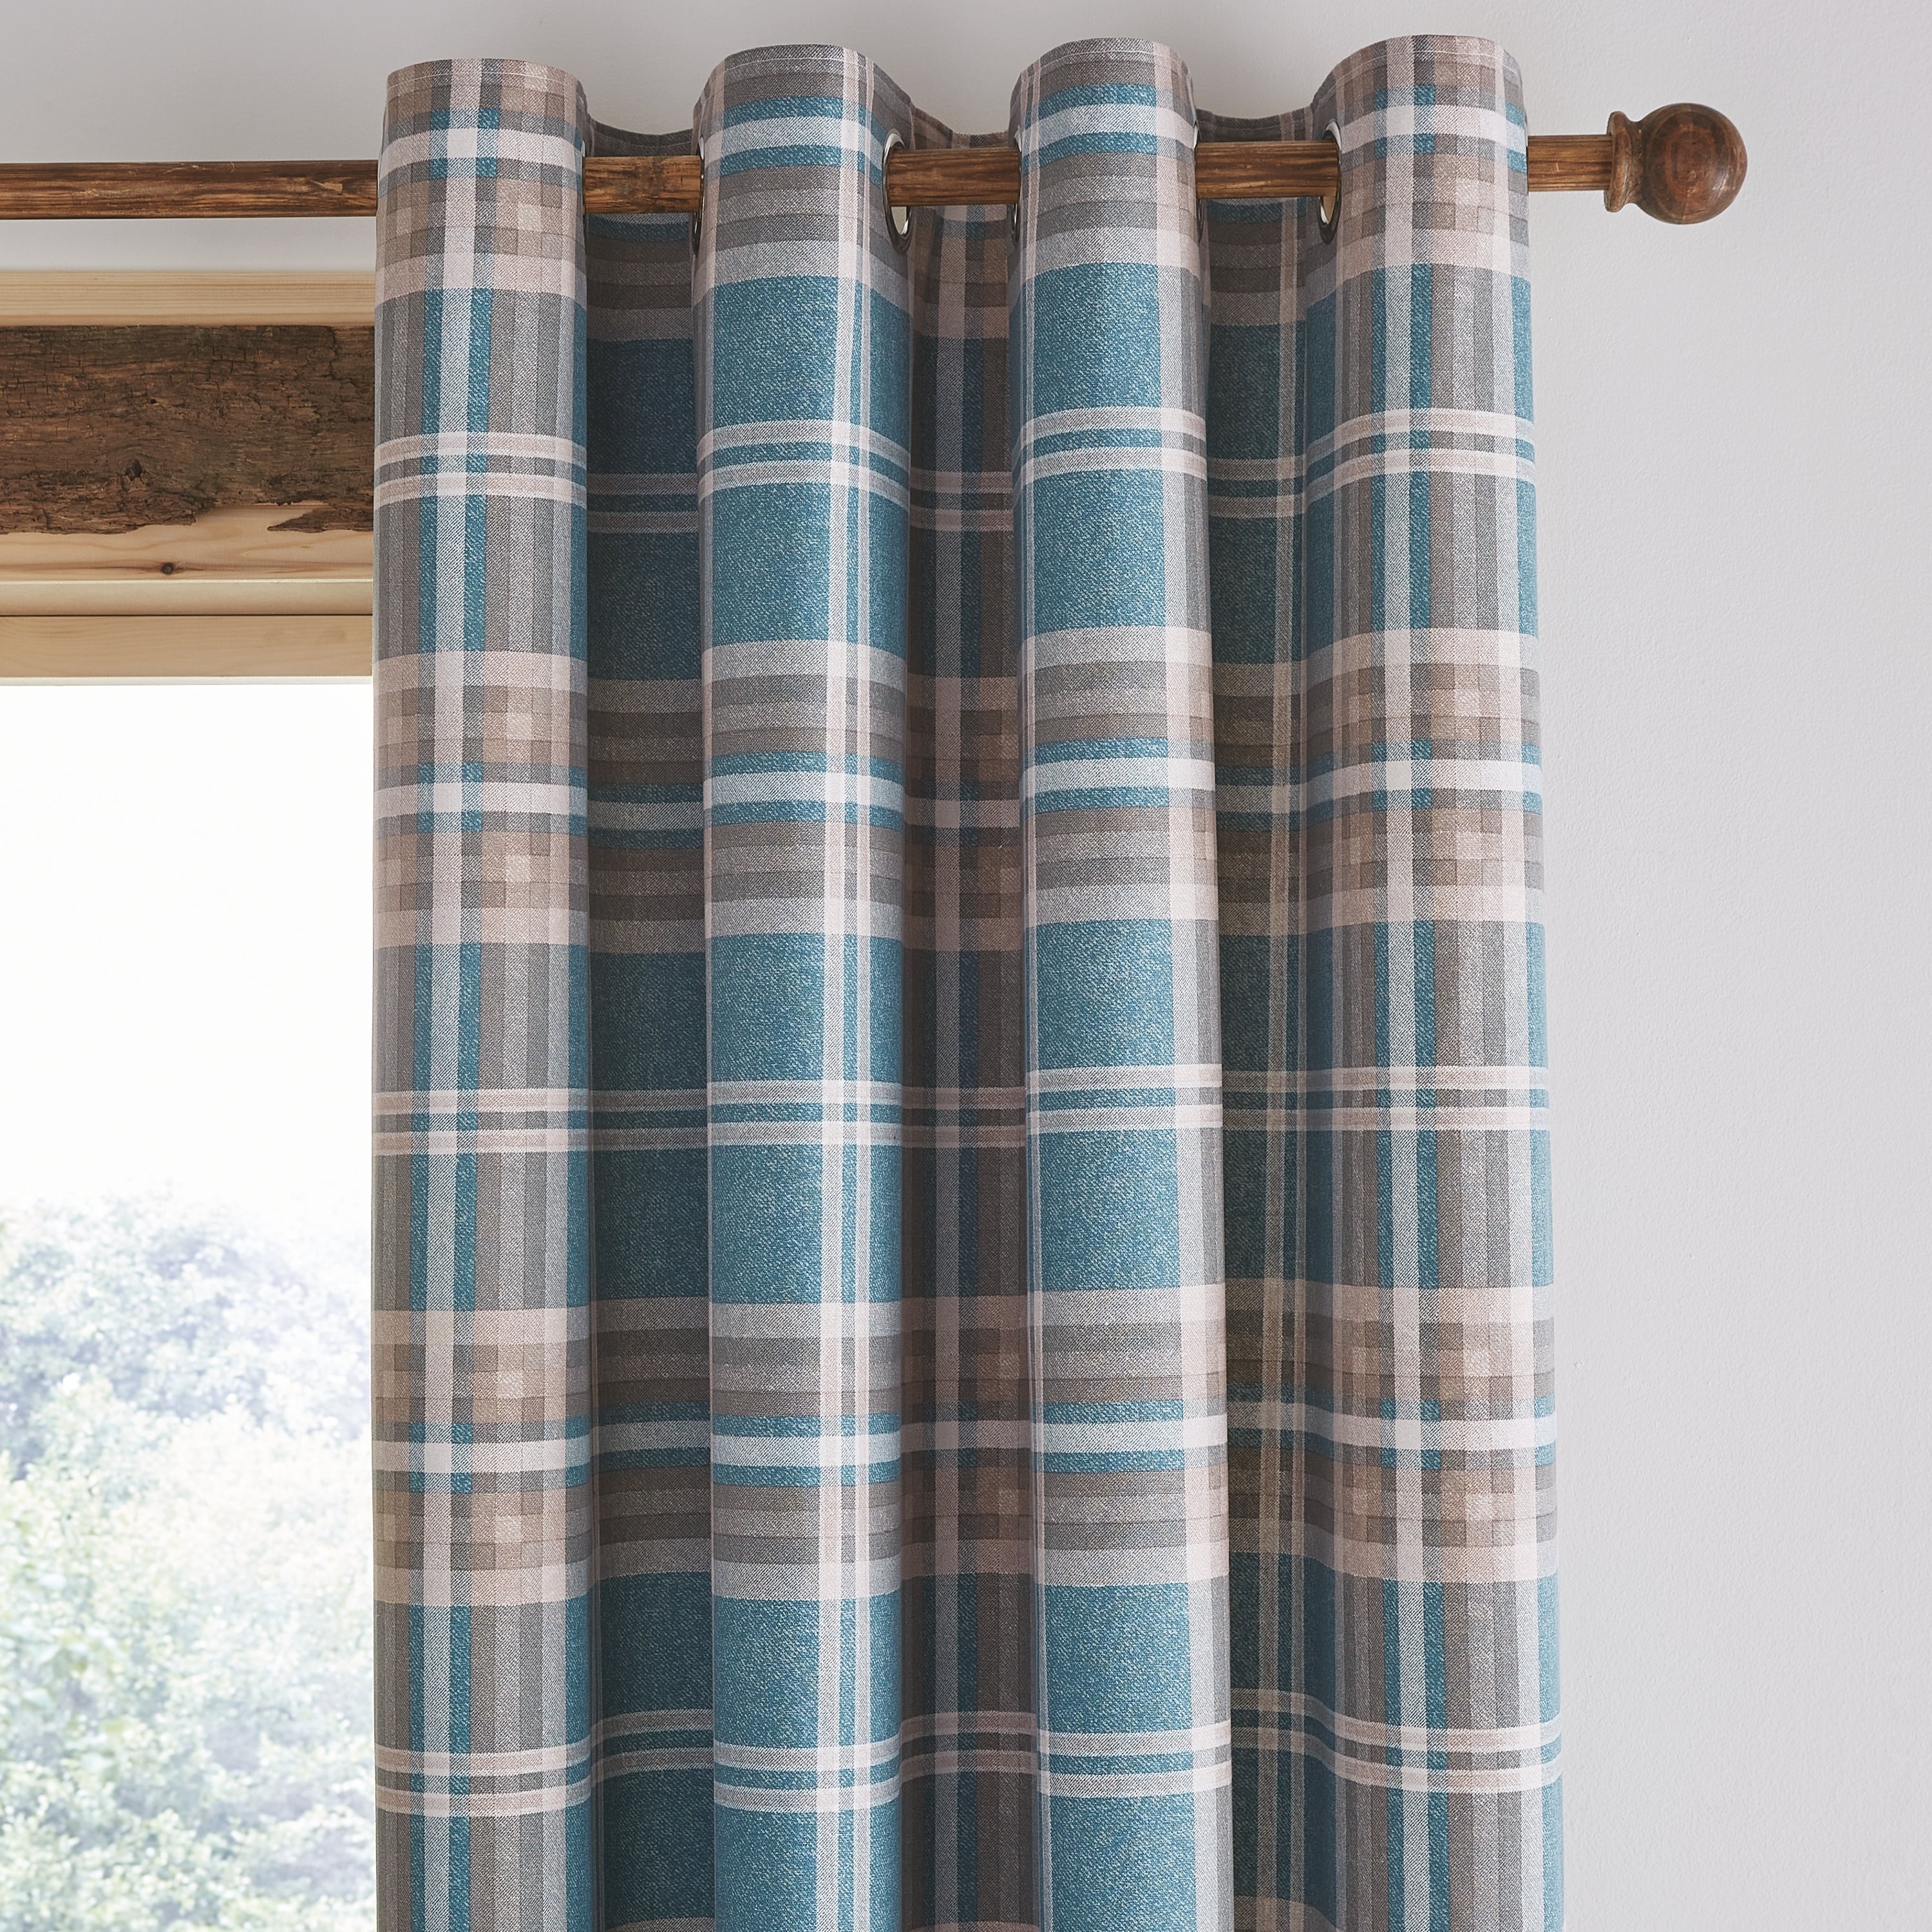 Photos - Curtains & Drapes Woven Tweed  Check Teal Eyelet Curtains Blue/Brown 